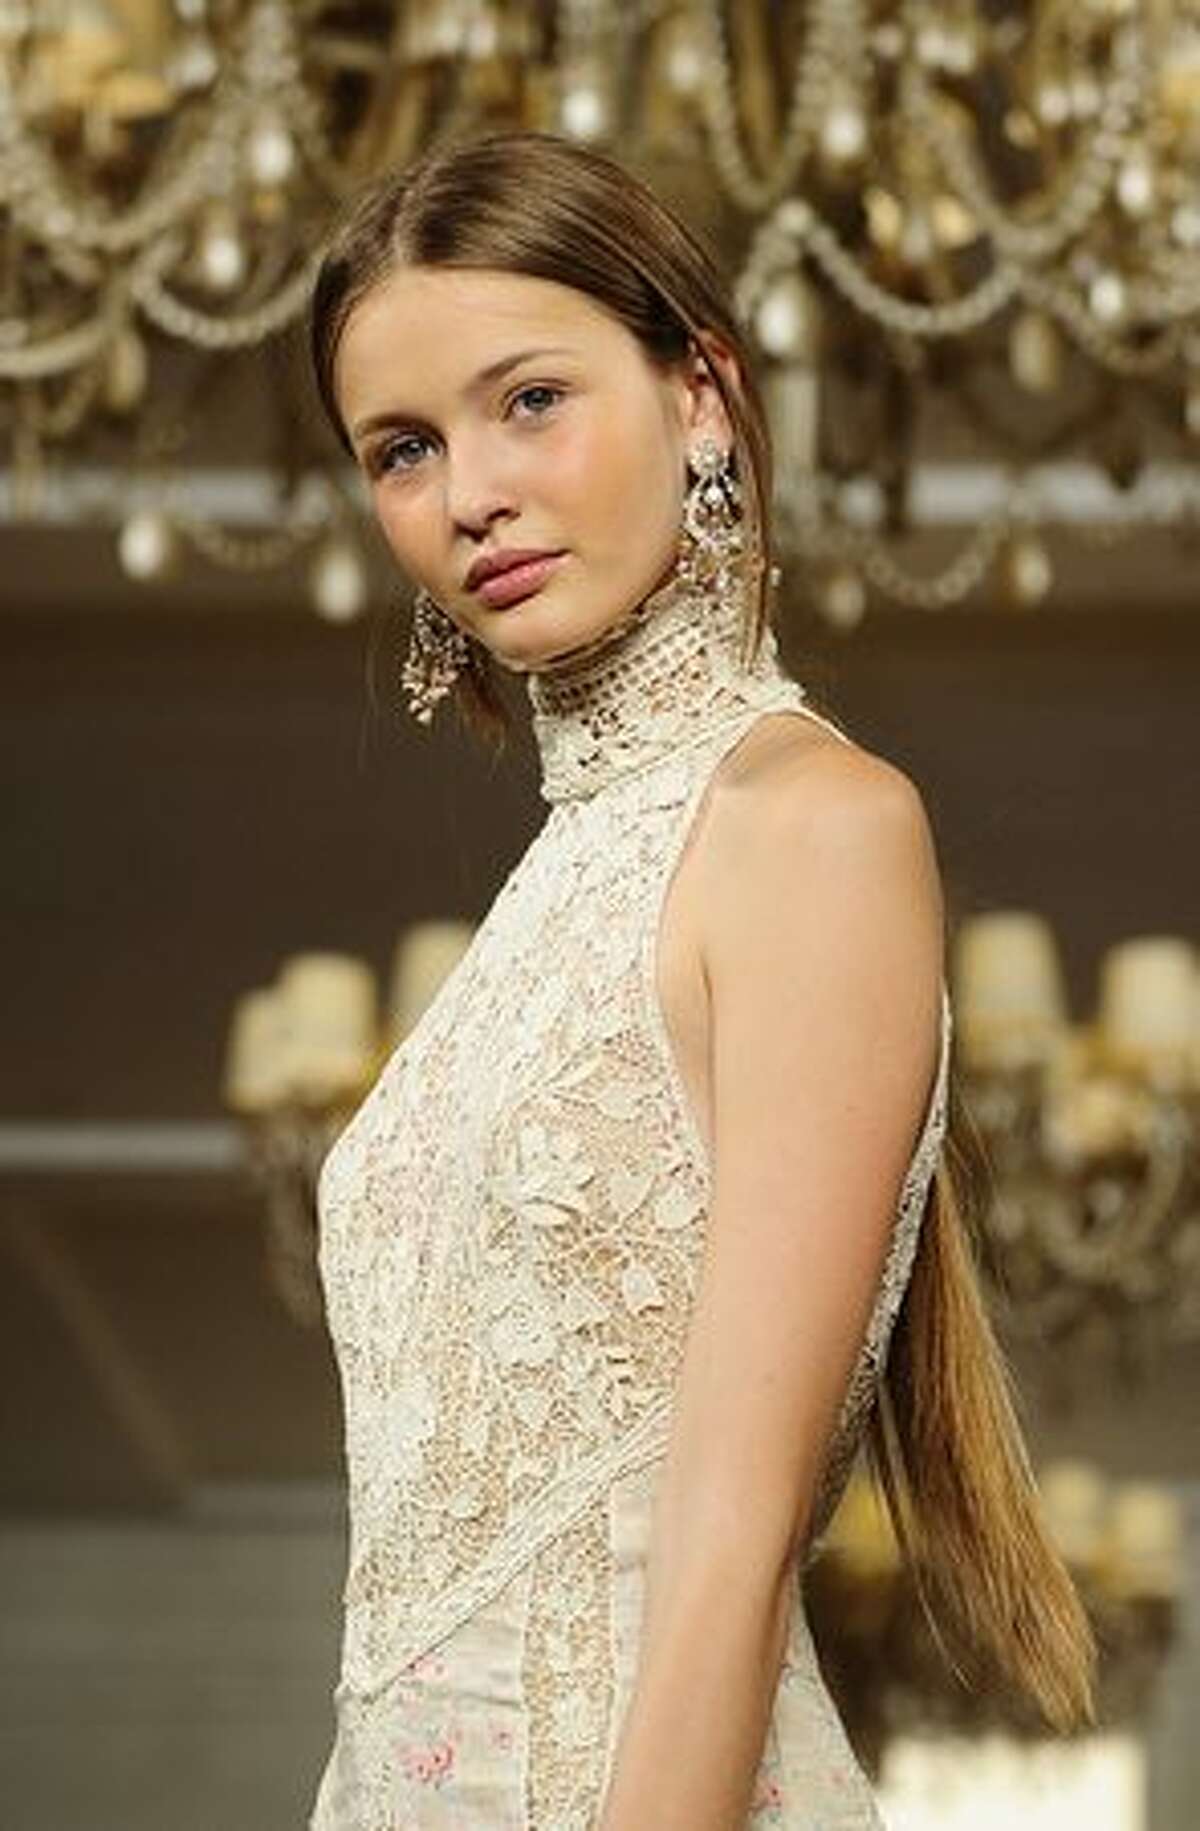 A model presents a creation by Ralph Lauren during the Mercedes Benz Fashion Week in New York.